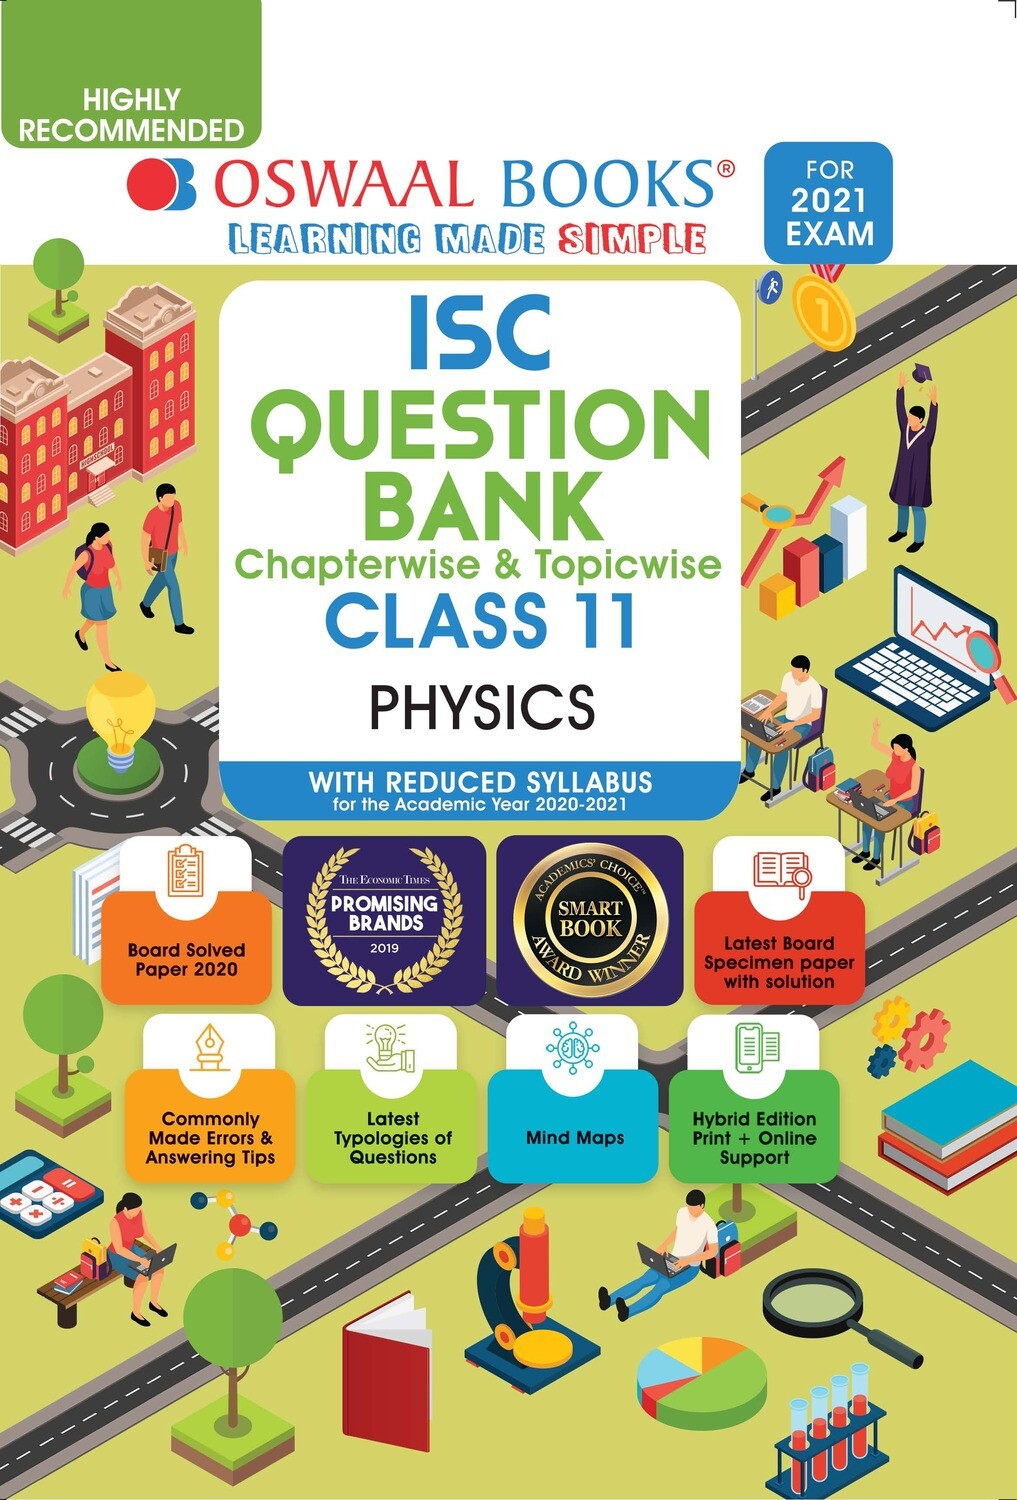 Buy e-book: Oswaal ISC Question Banks Class 11 Physics (Reduced Syllabus) (For 2021 Exam)